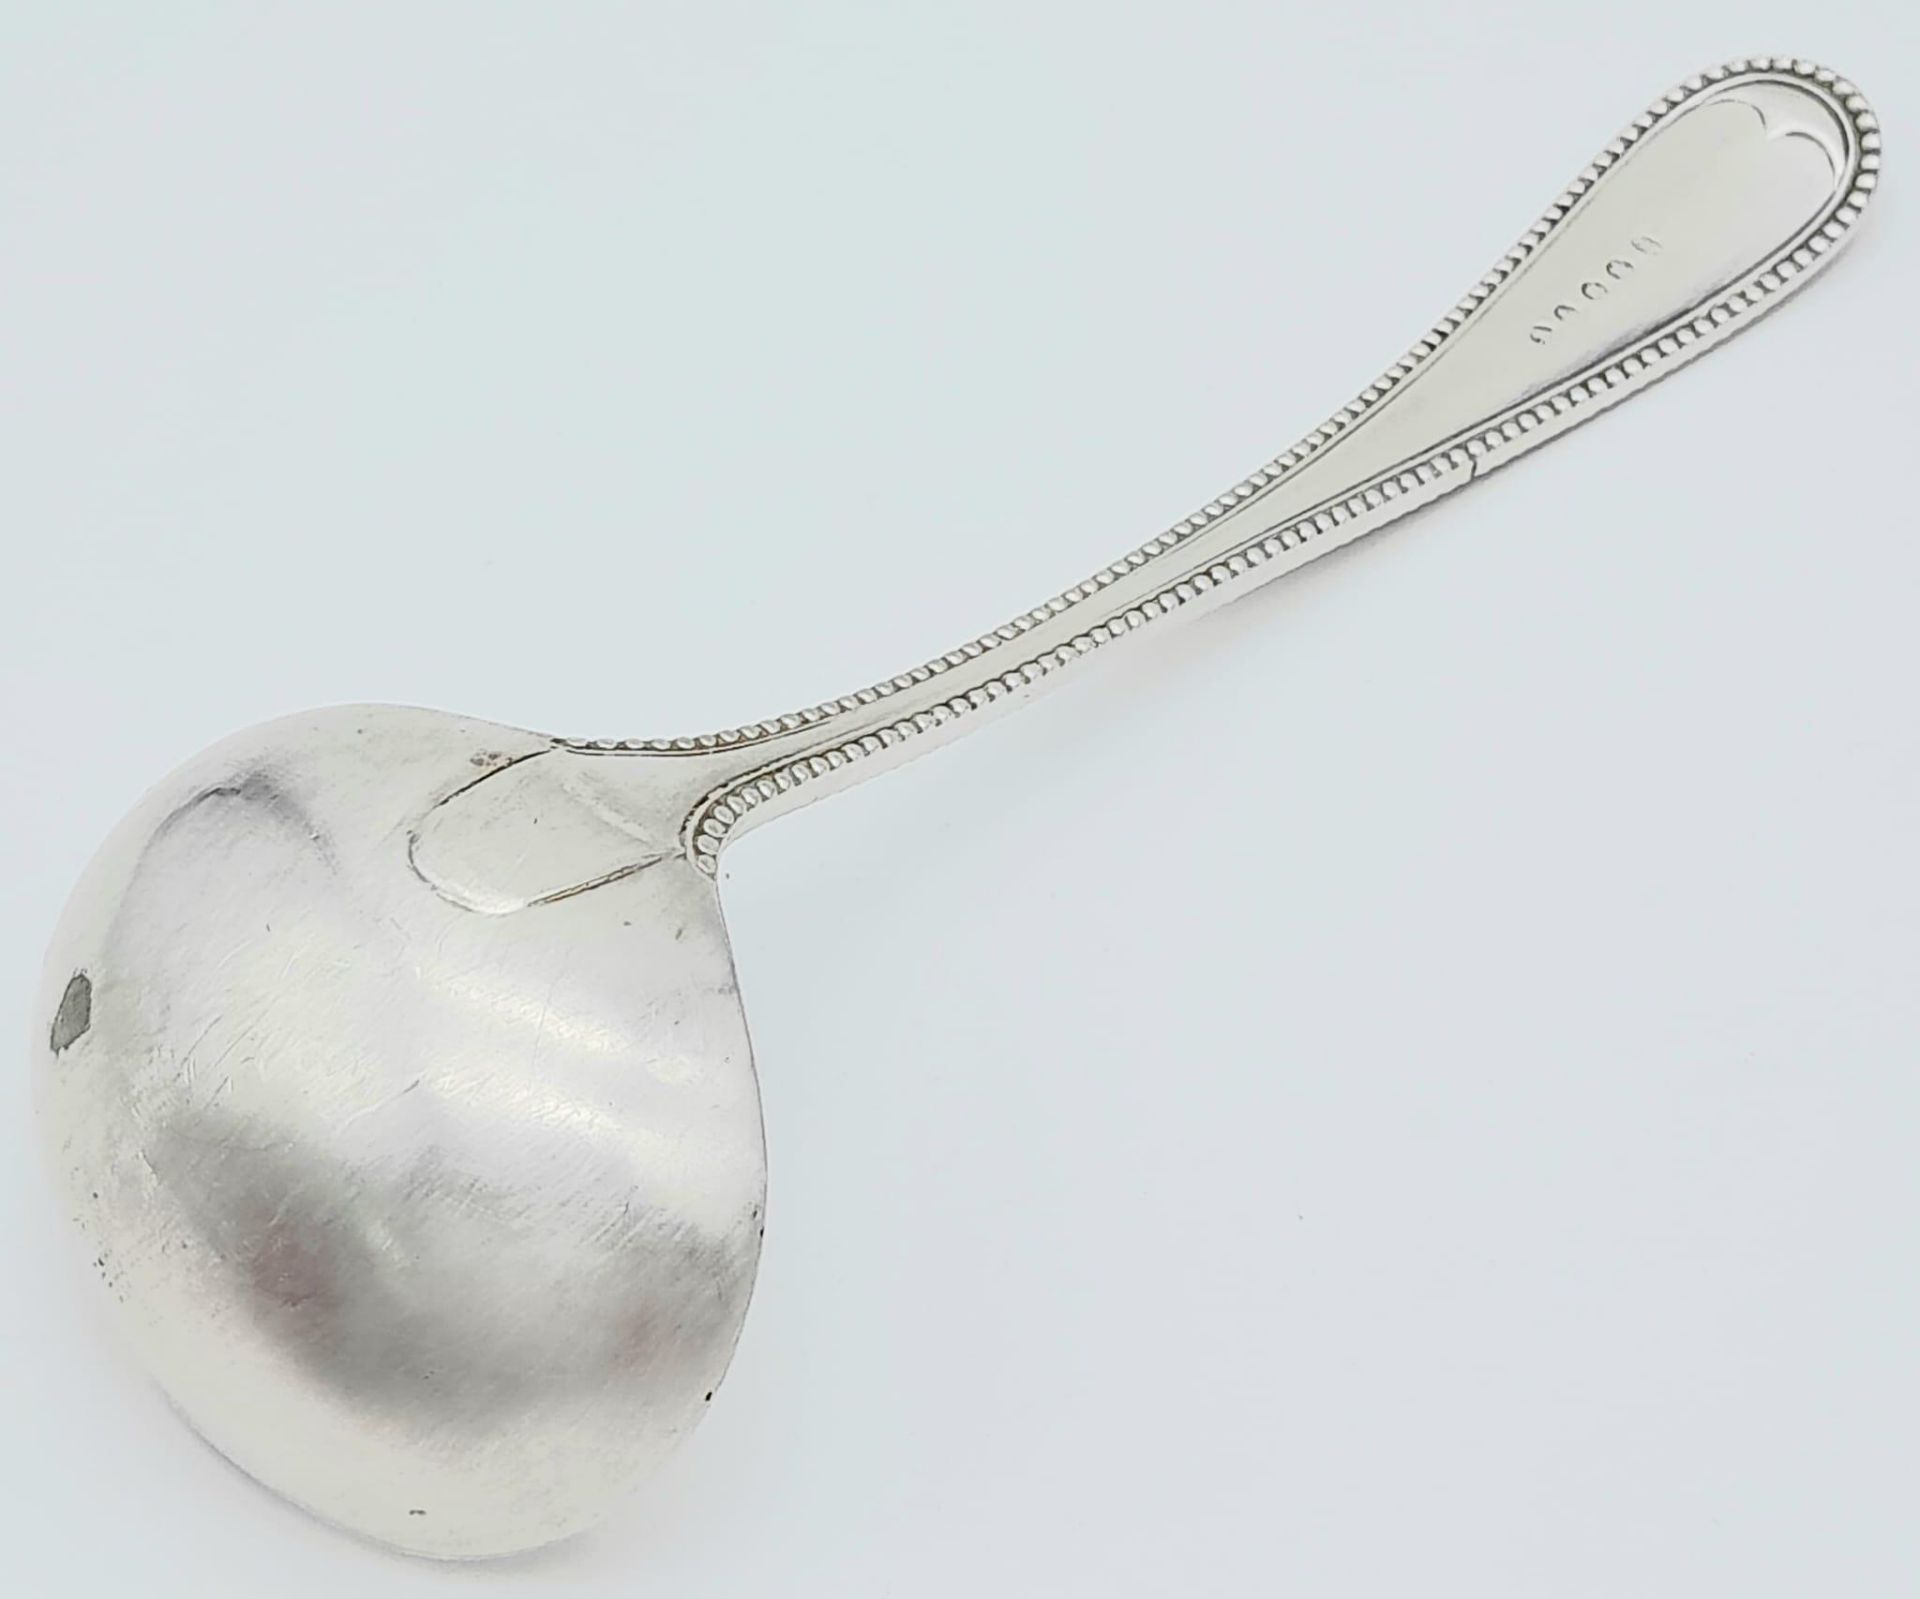 An antique Silver Ladle. Fully hallmarked and measures 19.5cm in length. Weight: 91.36g - Image 3 of 5